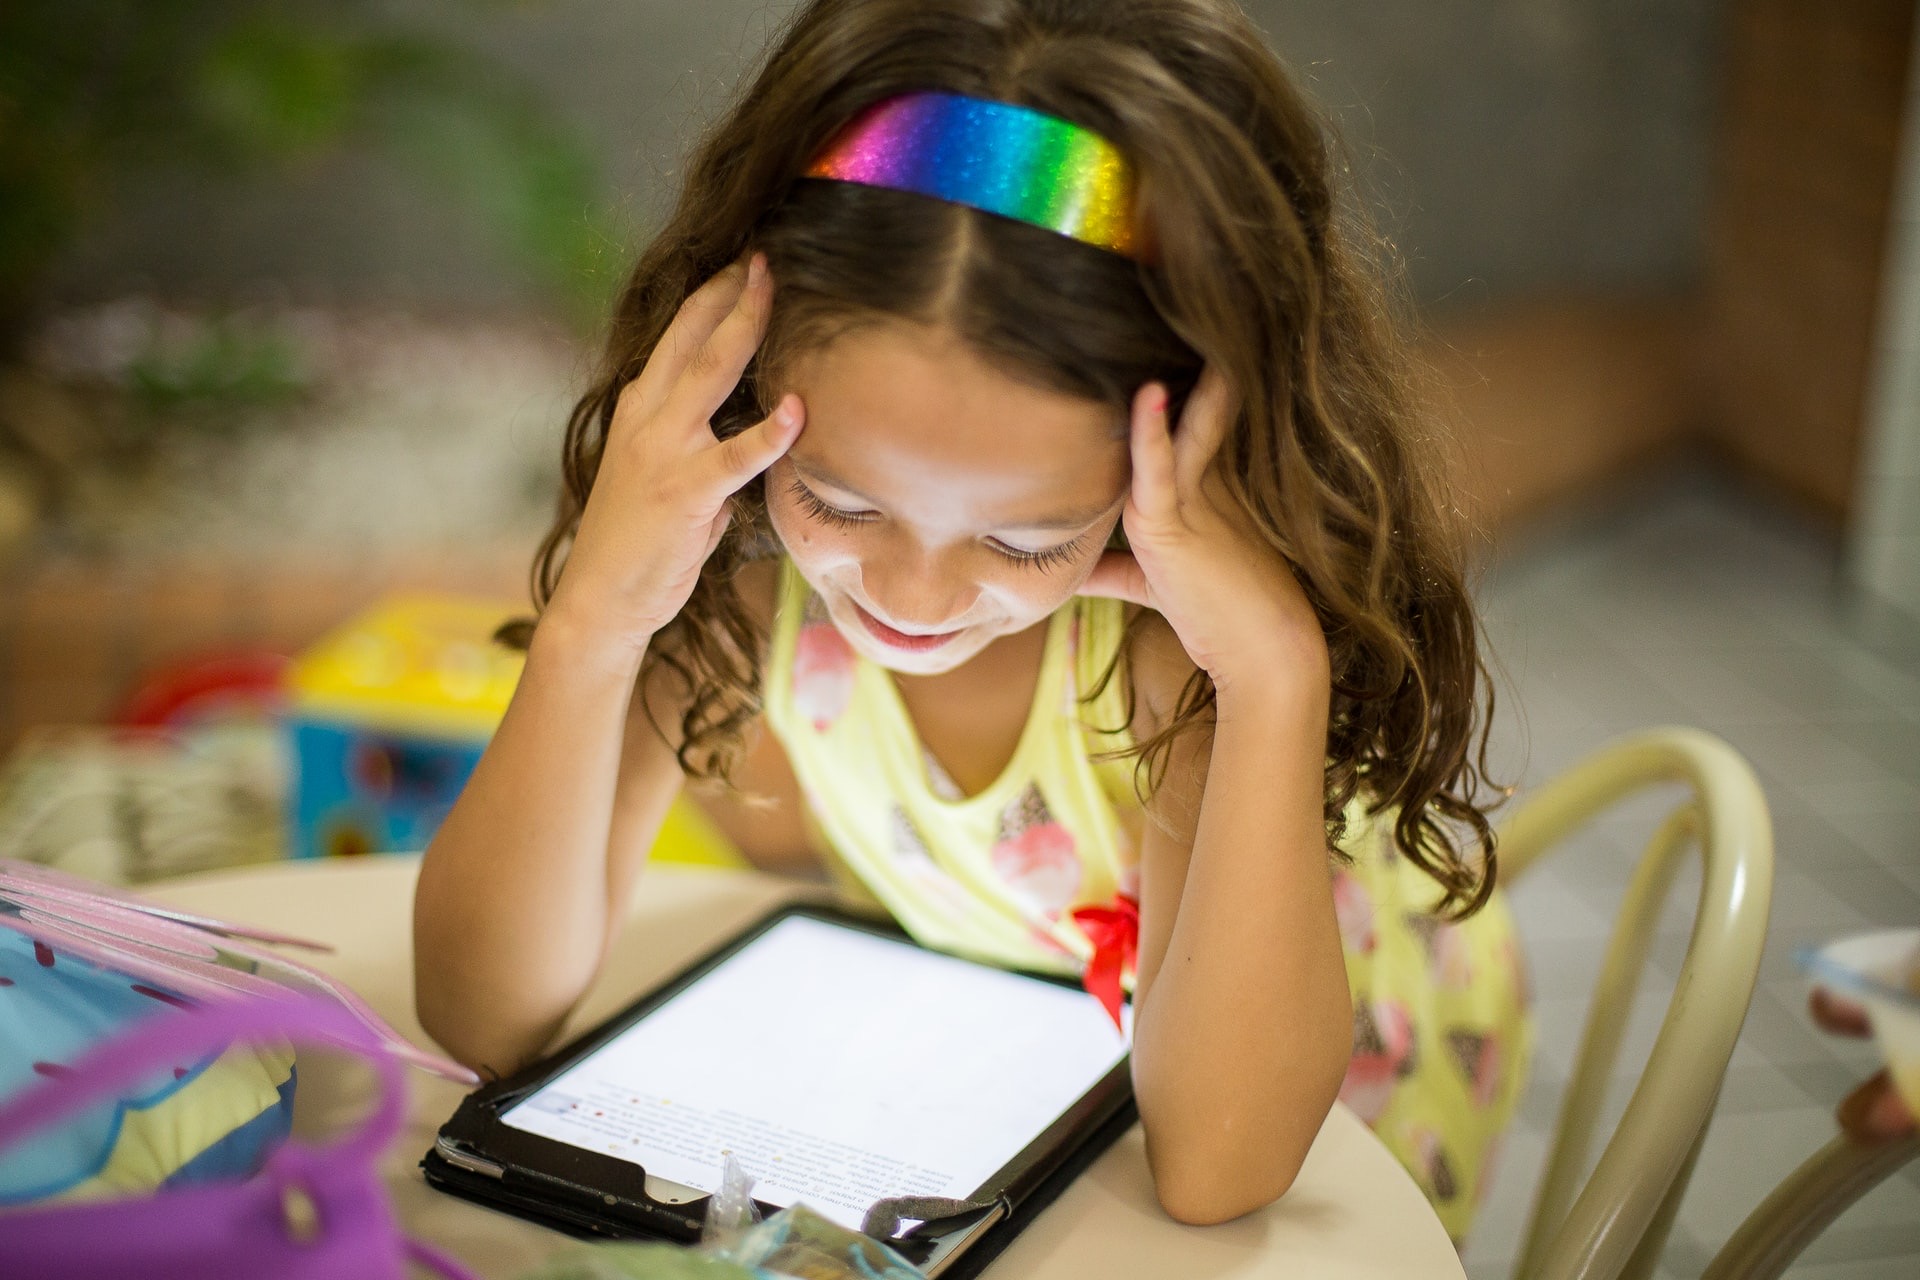 Have the iPads and Tablets Become the Modern Babysitter?